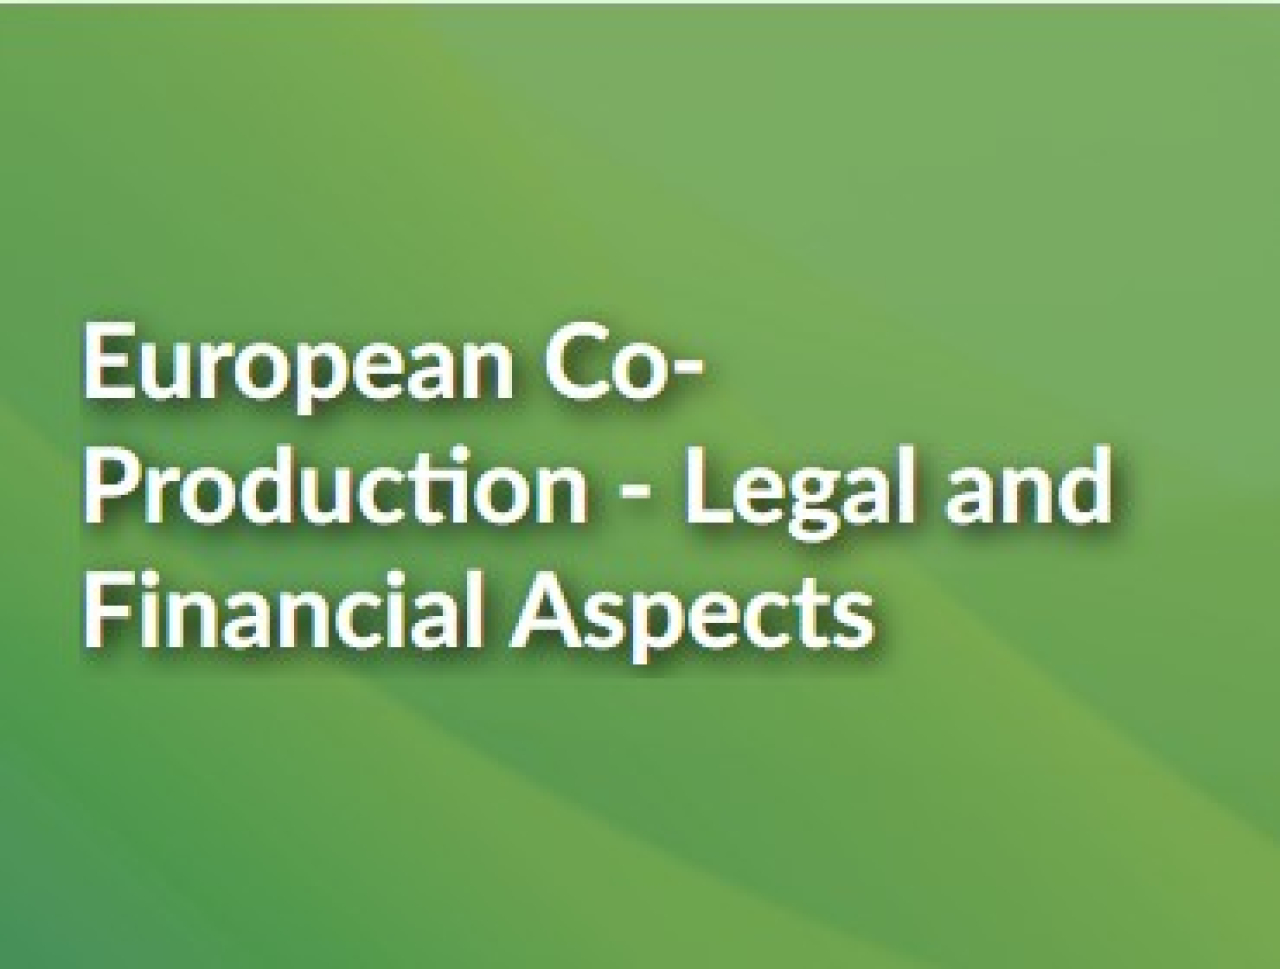 EPI: European Co-Production - Legal and Financial Aspects